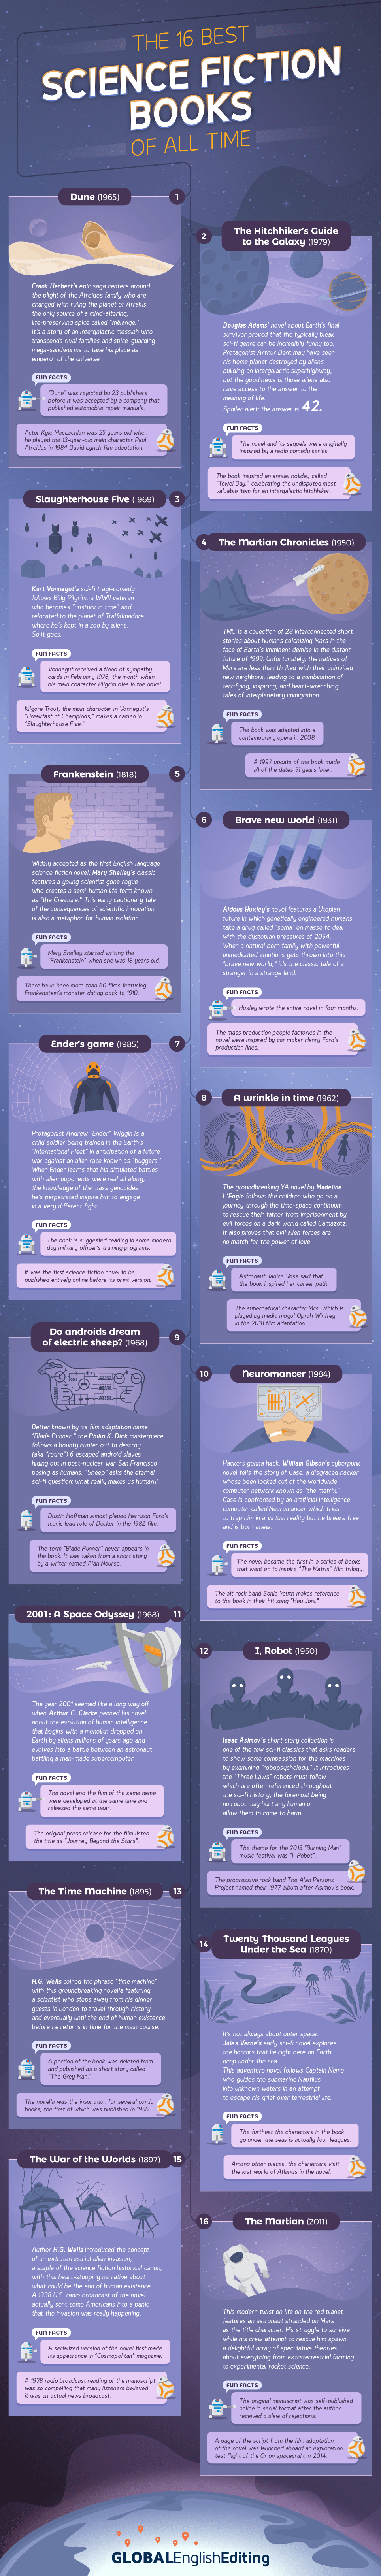 science fiction - infographic